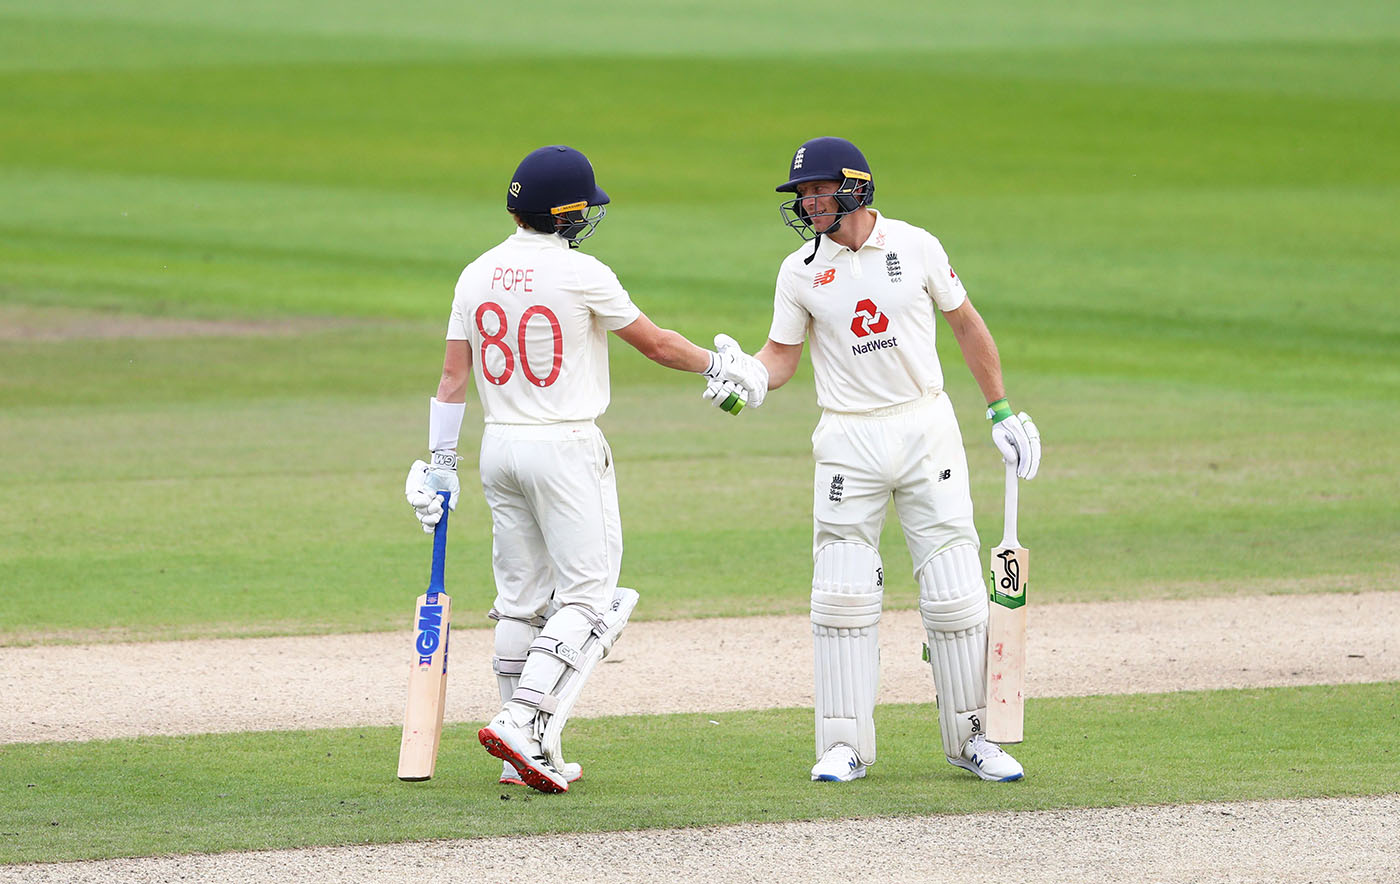 England vs West Indies 2020: 3rd Test, Day 1 – Jos Buttler And Ollie Pope Lead The Charge For England After Early Collapse